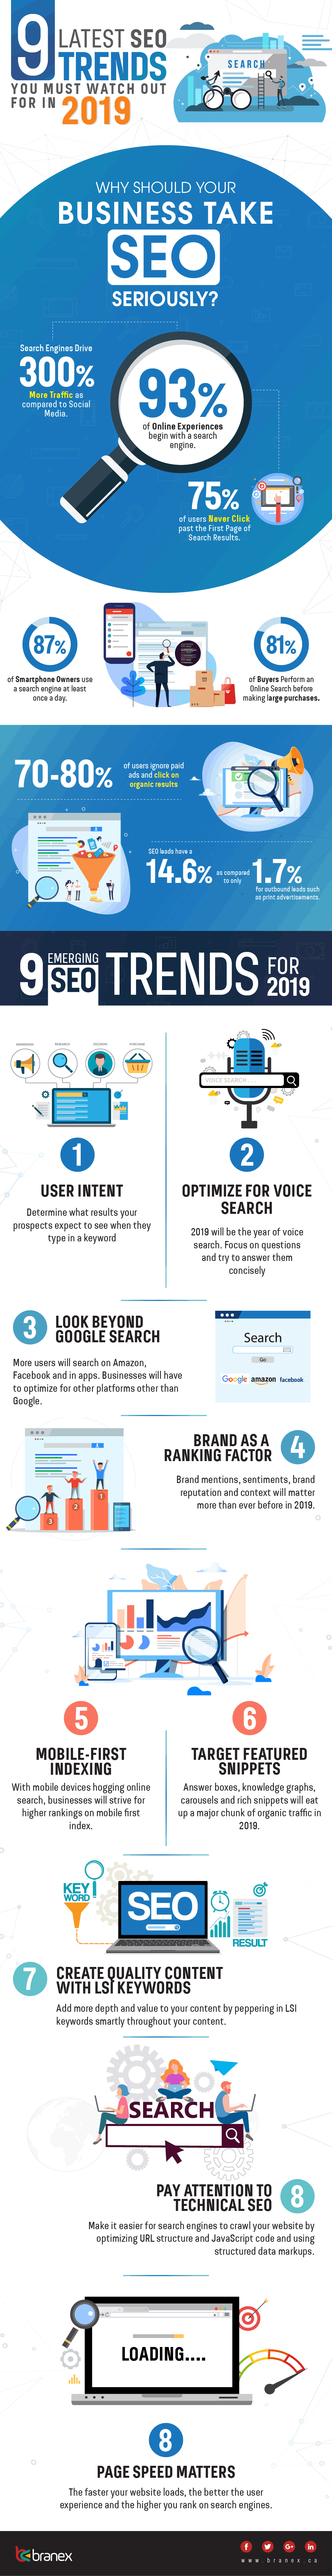 , 9 Emerging Search Engine Optimization Trends For 2019 [Infographic], TornCRM